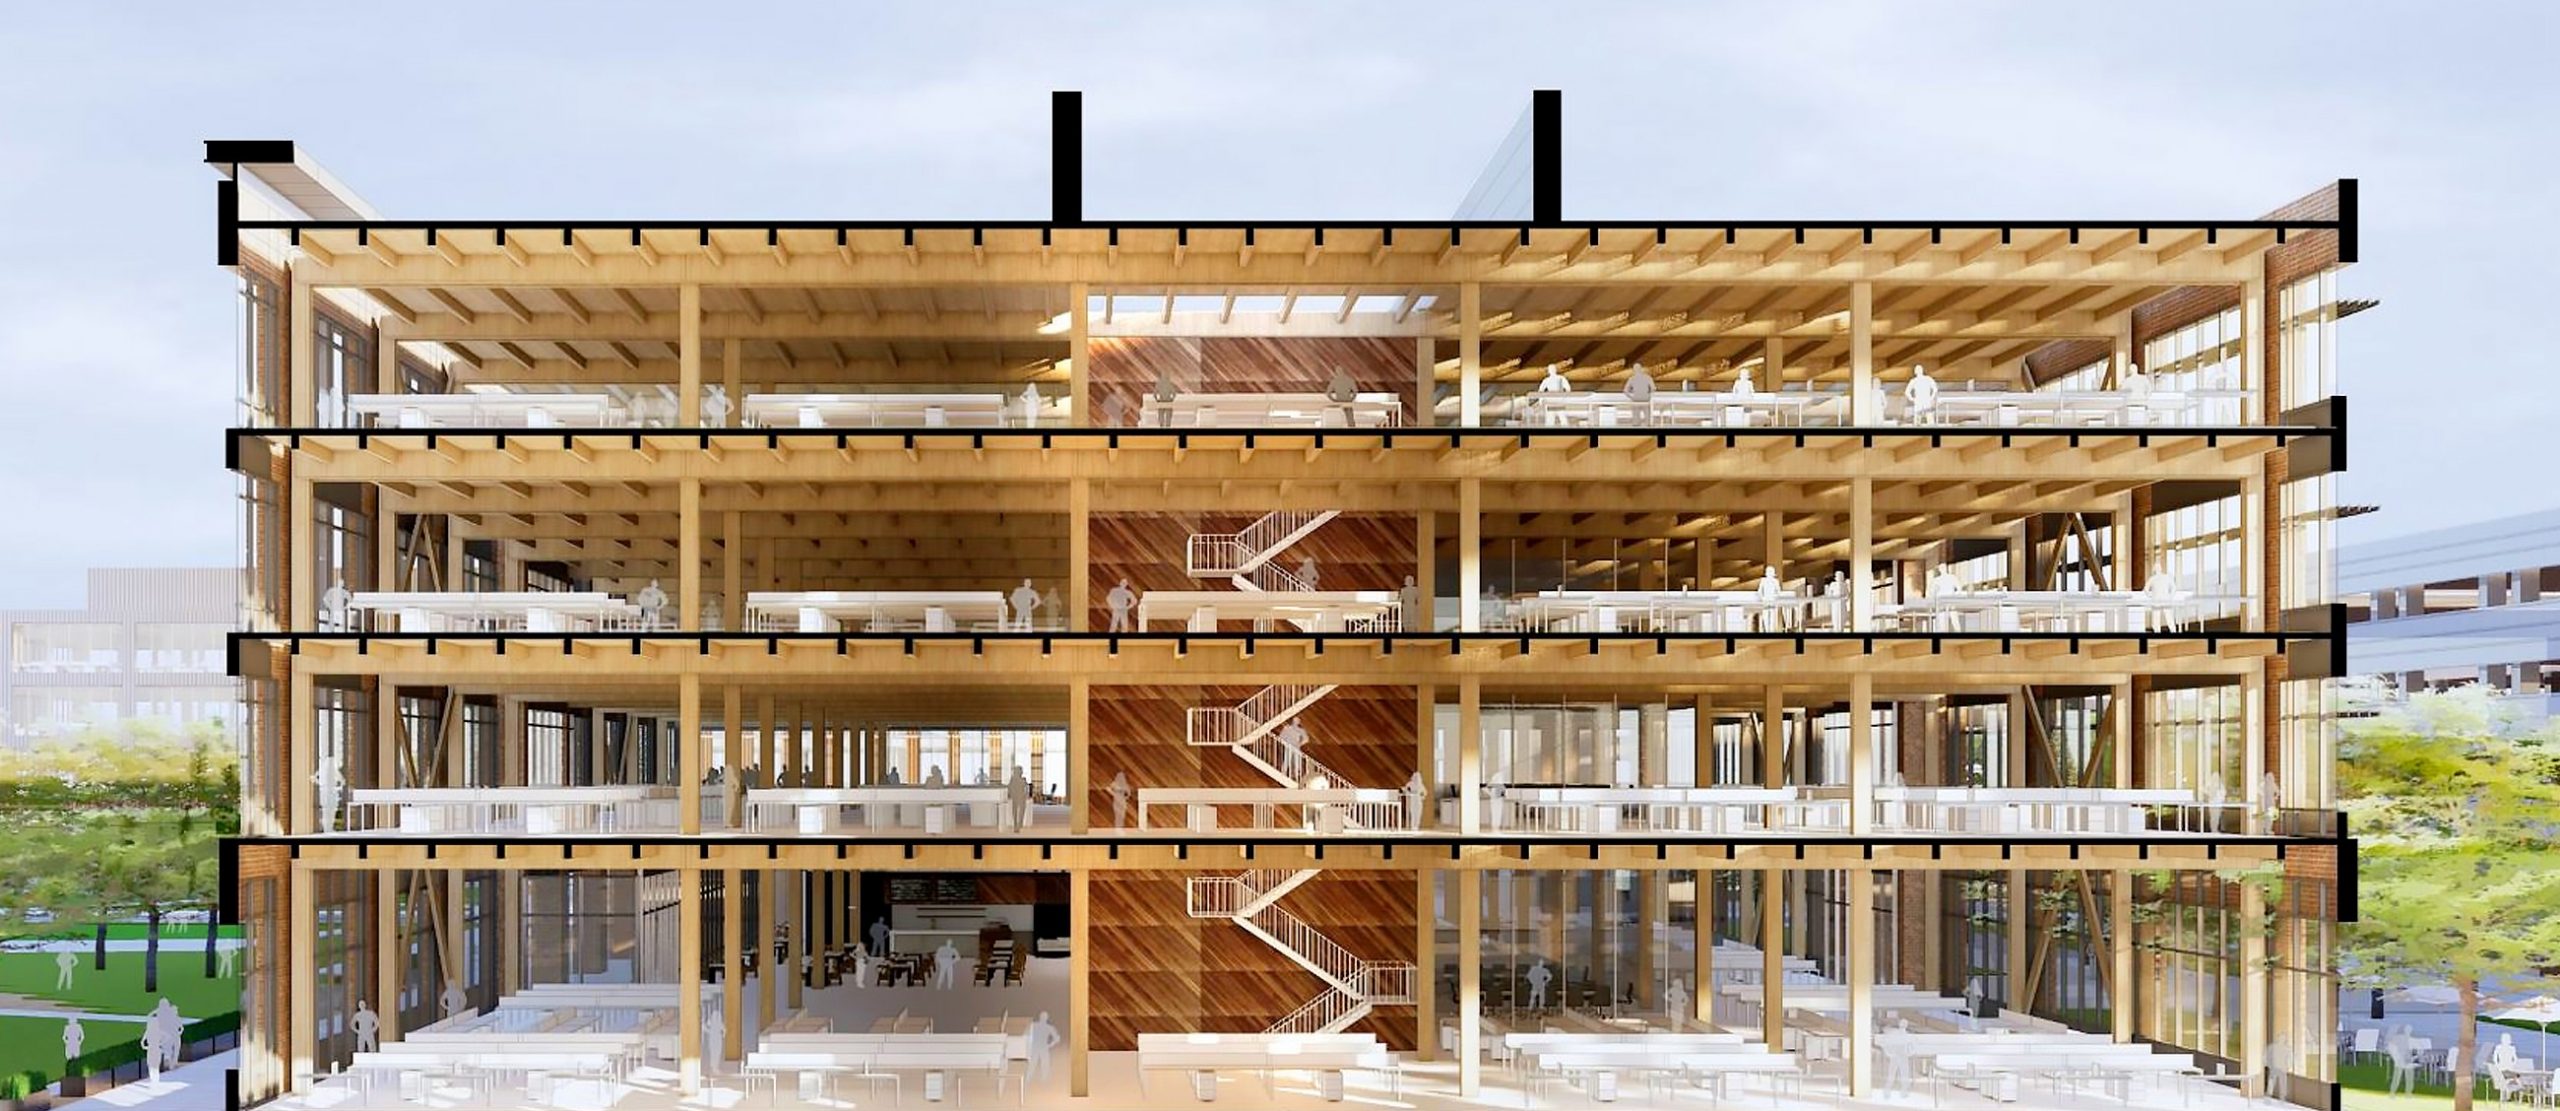 A concept drawing of Walmart's mass timber headquarters